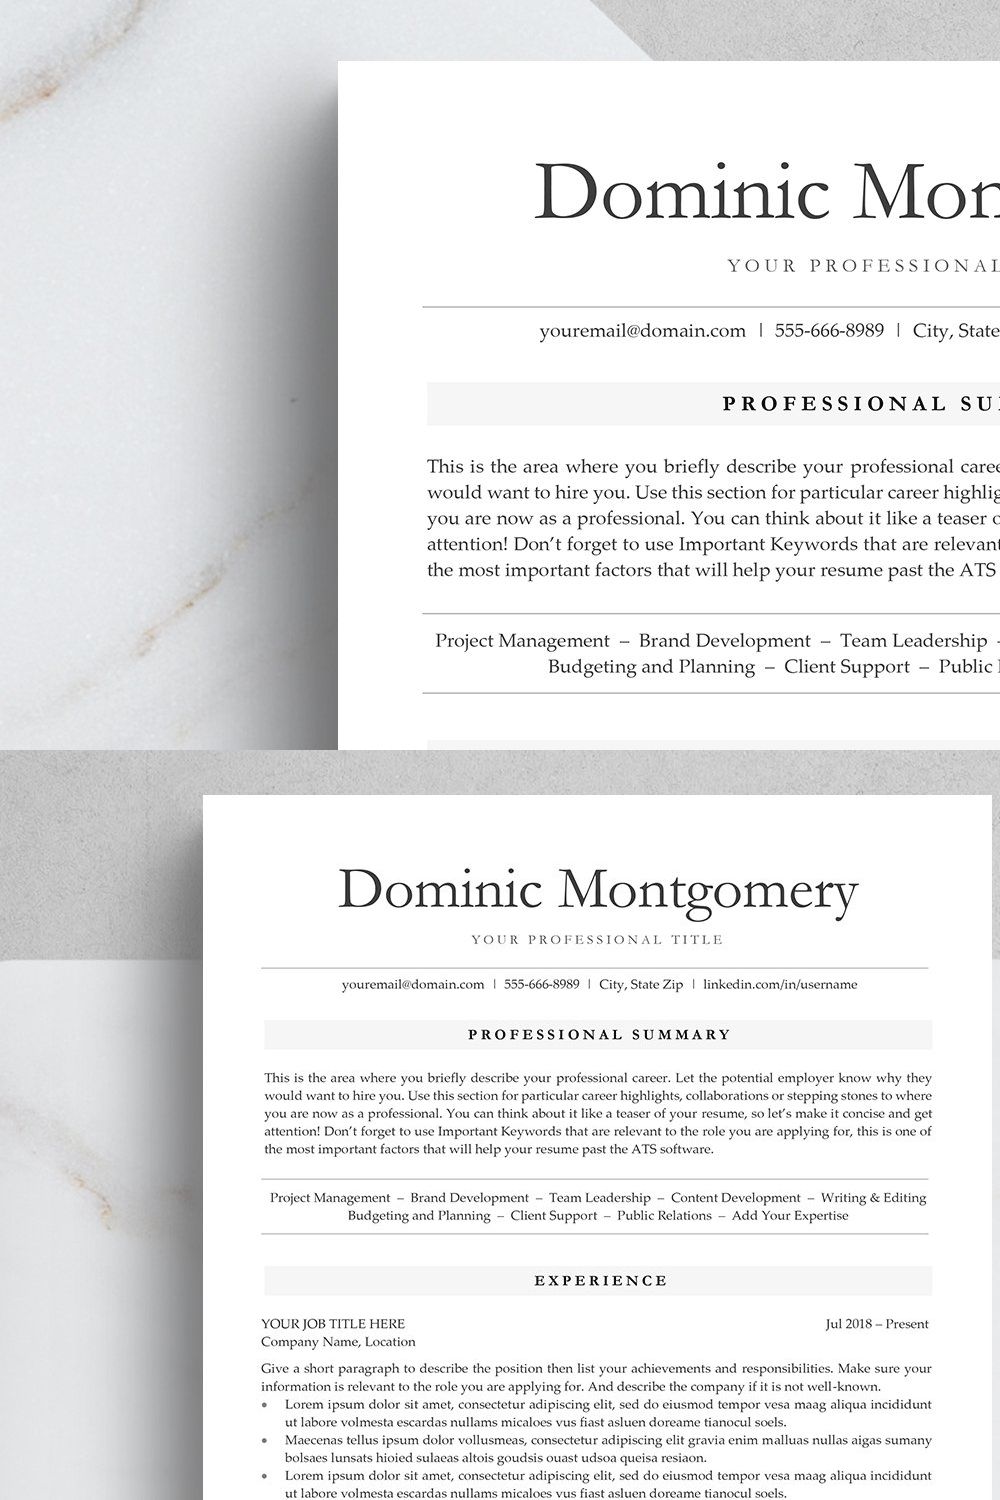 ATS Resume Template - DOMINIC pinterest preview image.